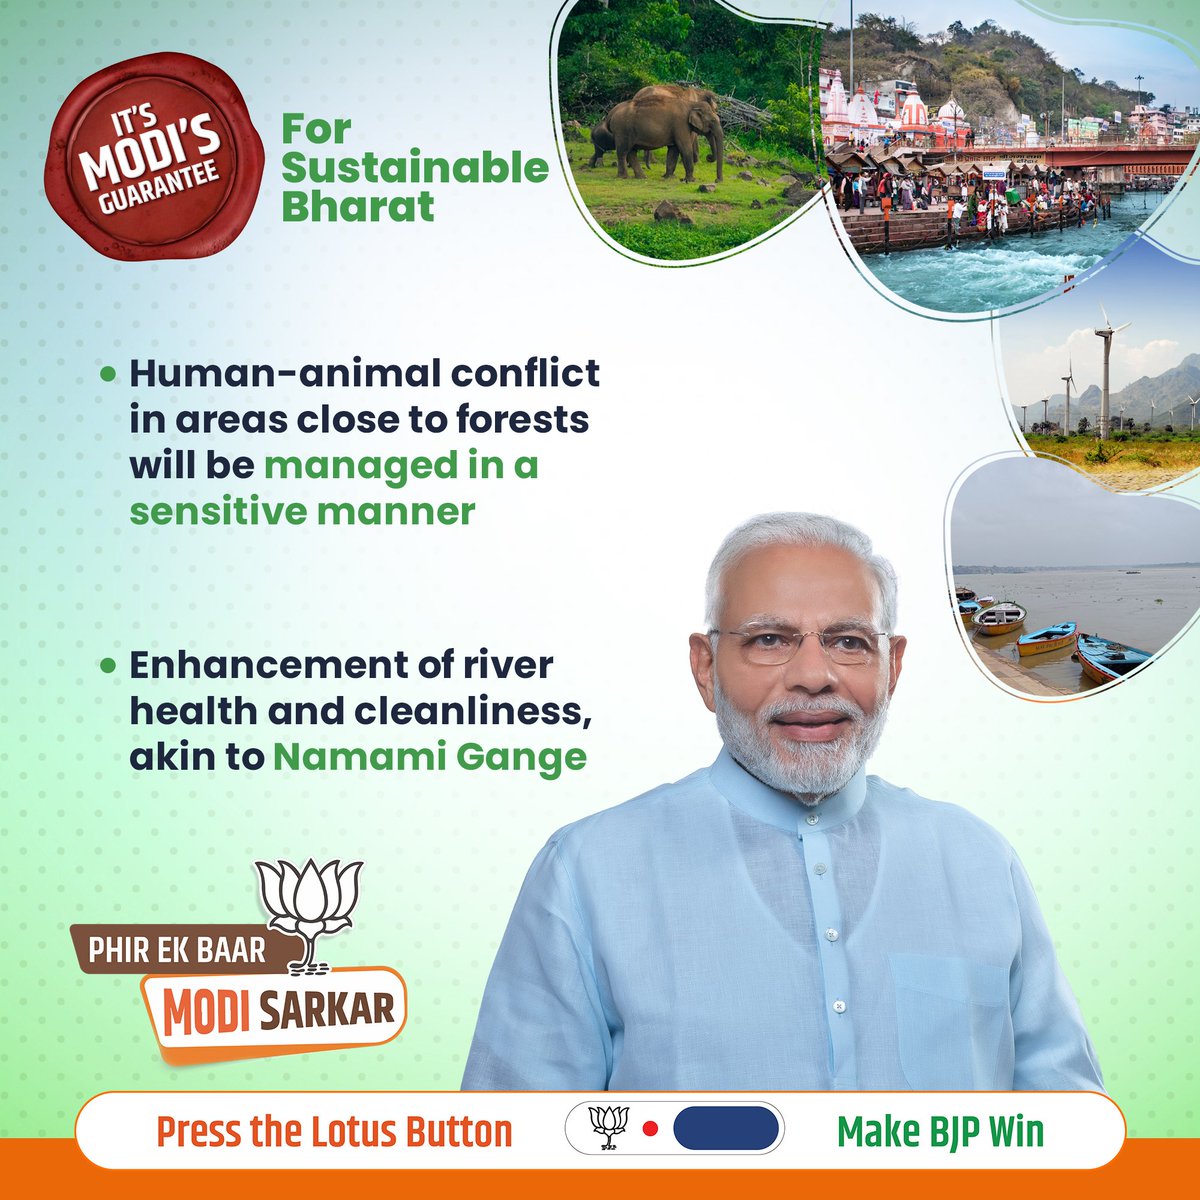 Modi government’s experience in preserving and improving river ecosystems with Namami Gange will be replicated to improve Heath of rivers around Bharat, and peace will come to forests and cities with better management of human-animal conflict. That is Modi’s guarantee.